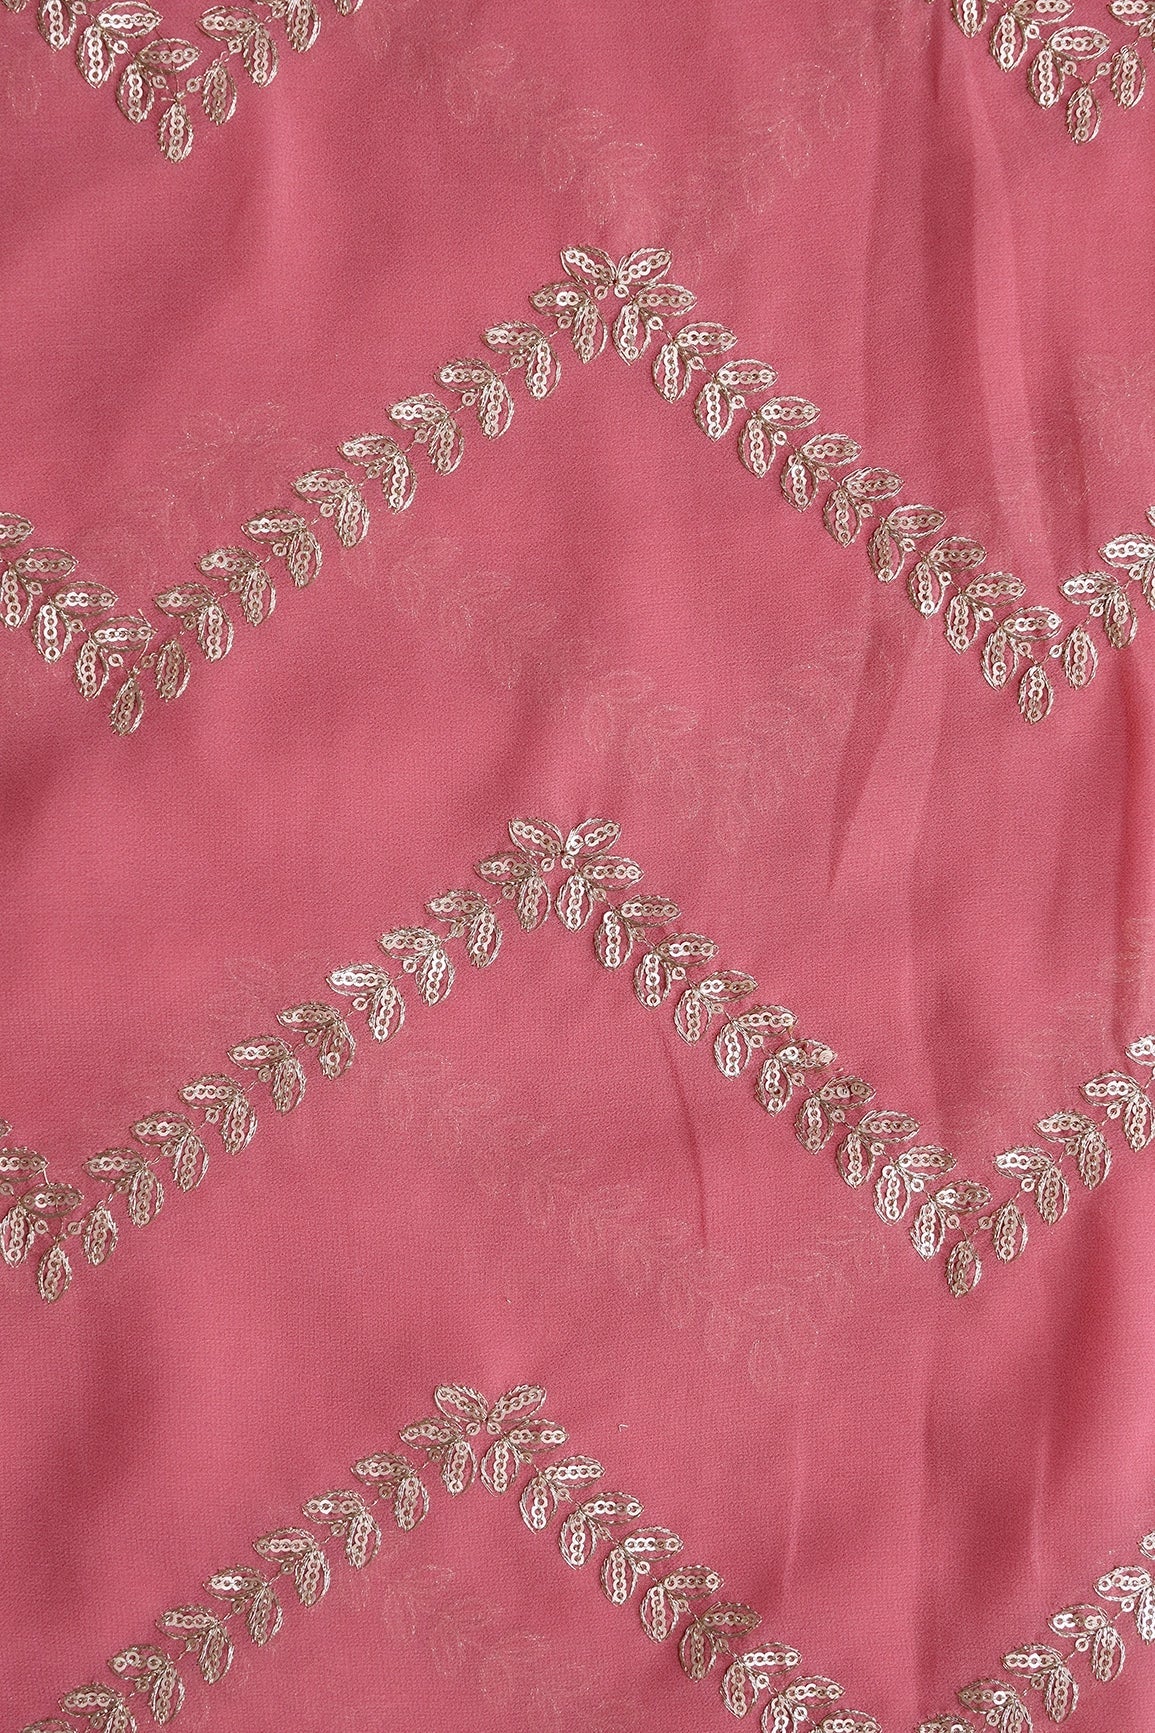 Gold Zari With Gold Sequins Chevron Embroidery Work On Gajri Pink Georgette Fabric - doeraa